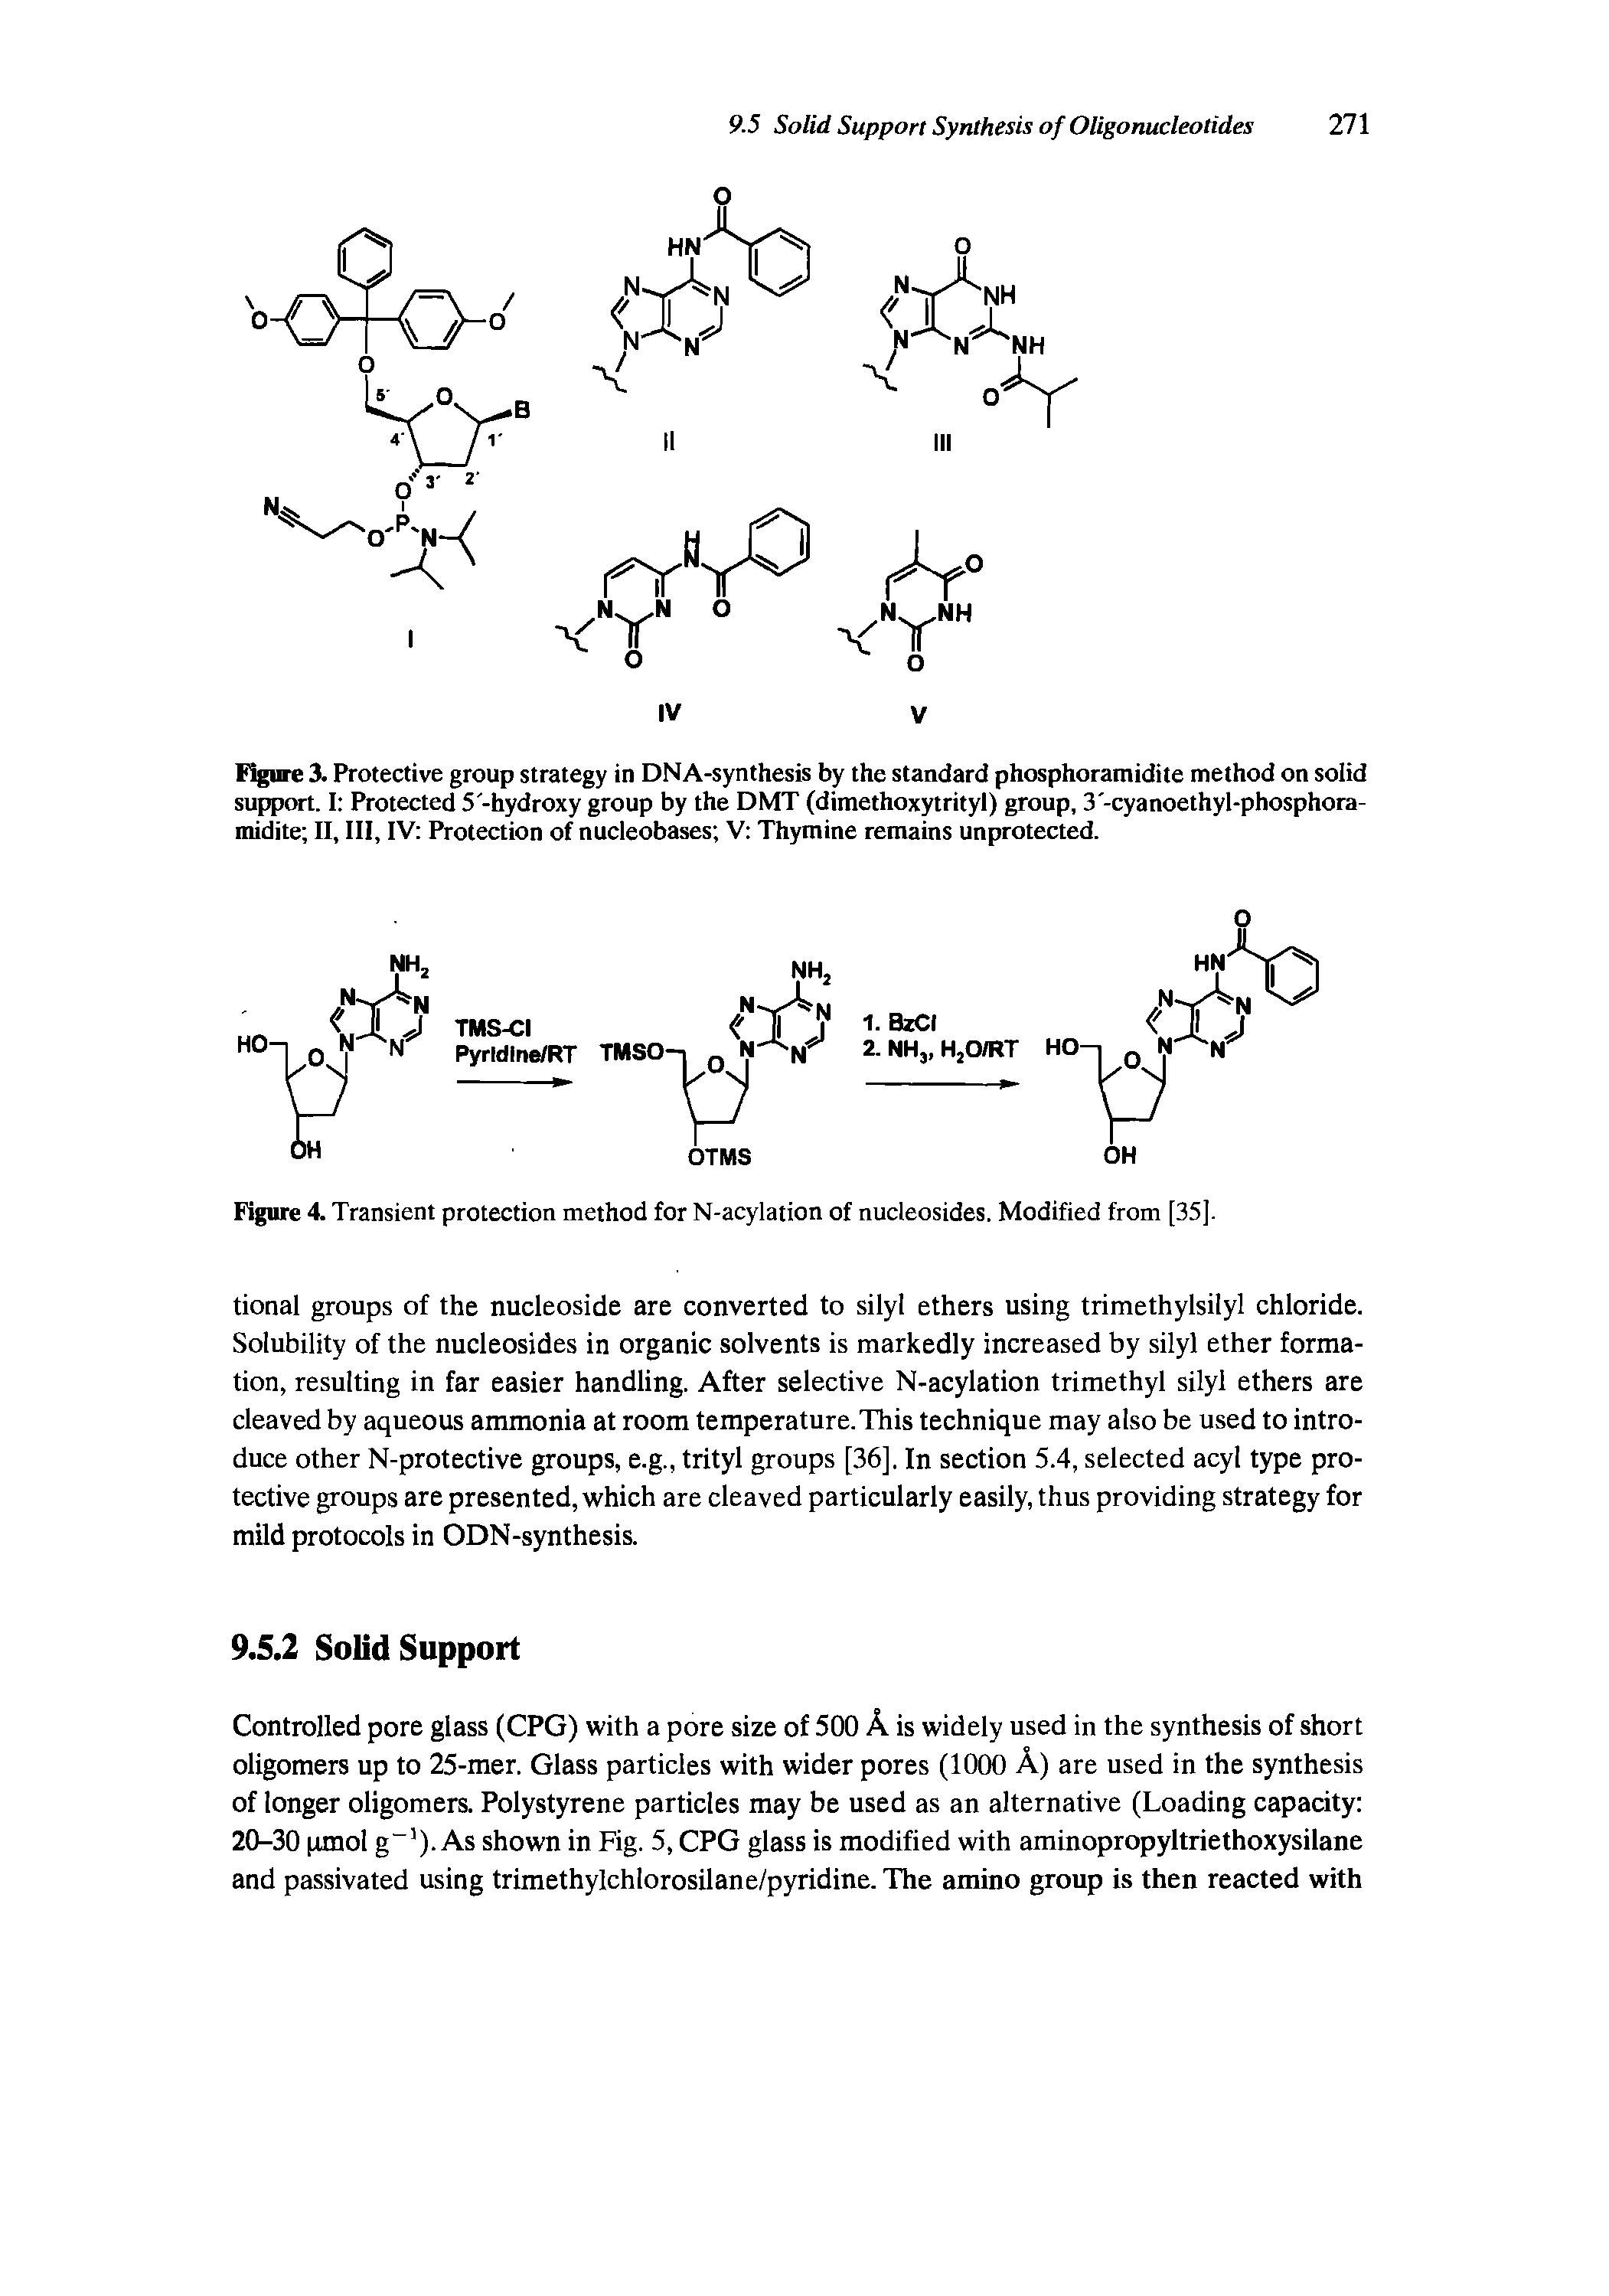 Figure 4. Transient protection method for N-acylation of nucleosides. Modified from [35].